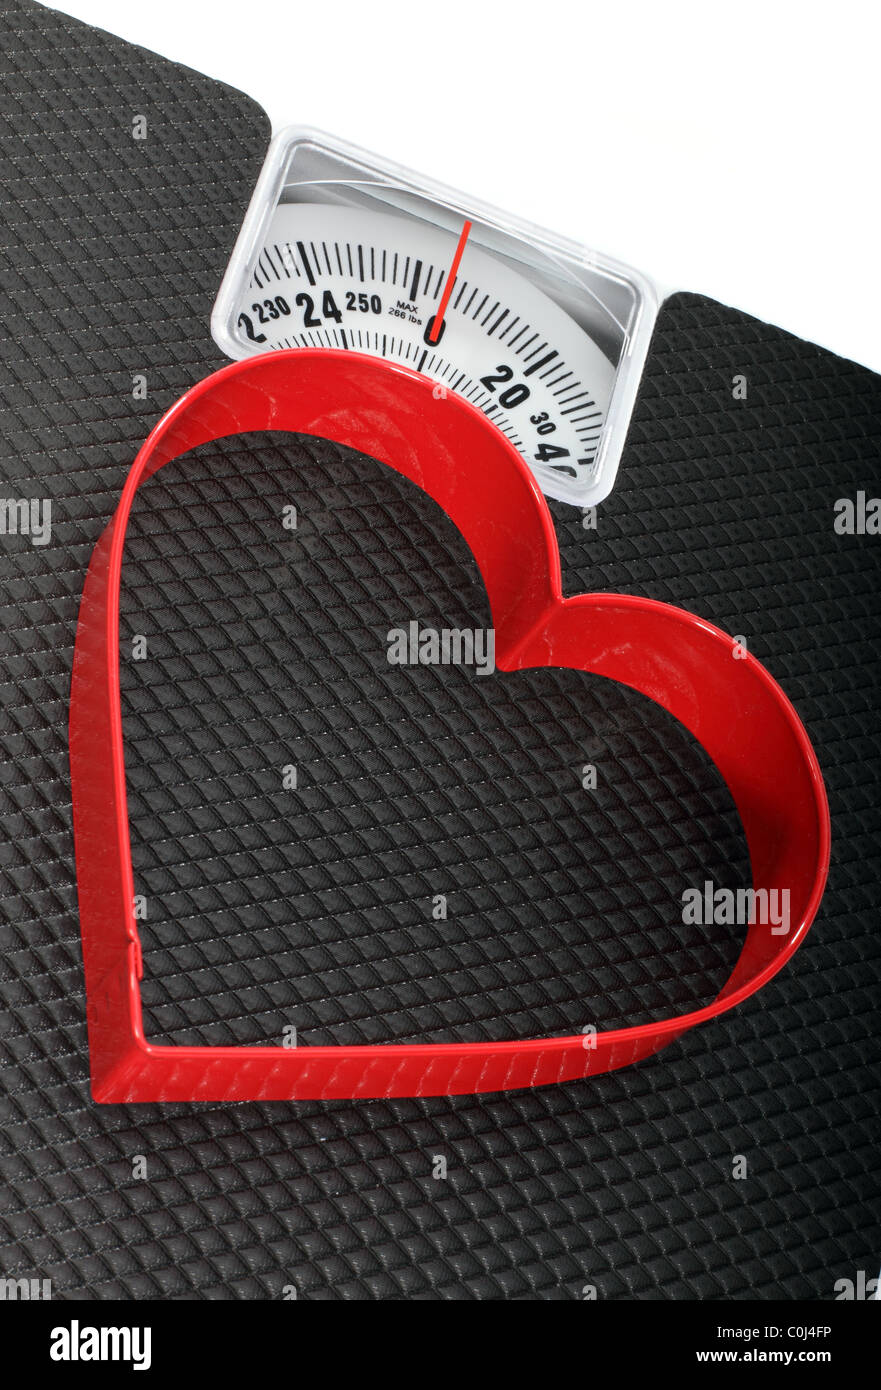 Bathroom Scales With A Red Heart Shaped Symbol For A Concept On Healthy Lifestyle Stock Photo